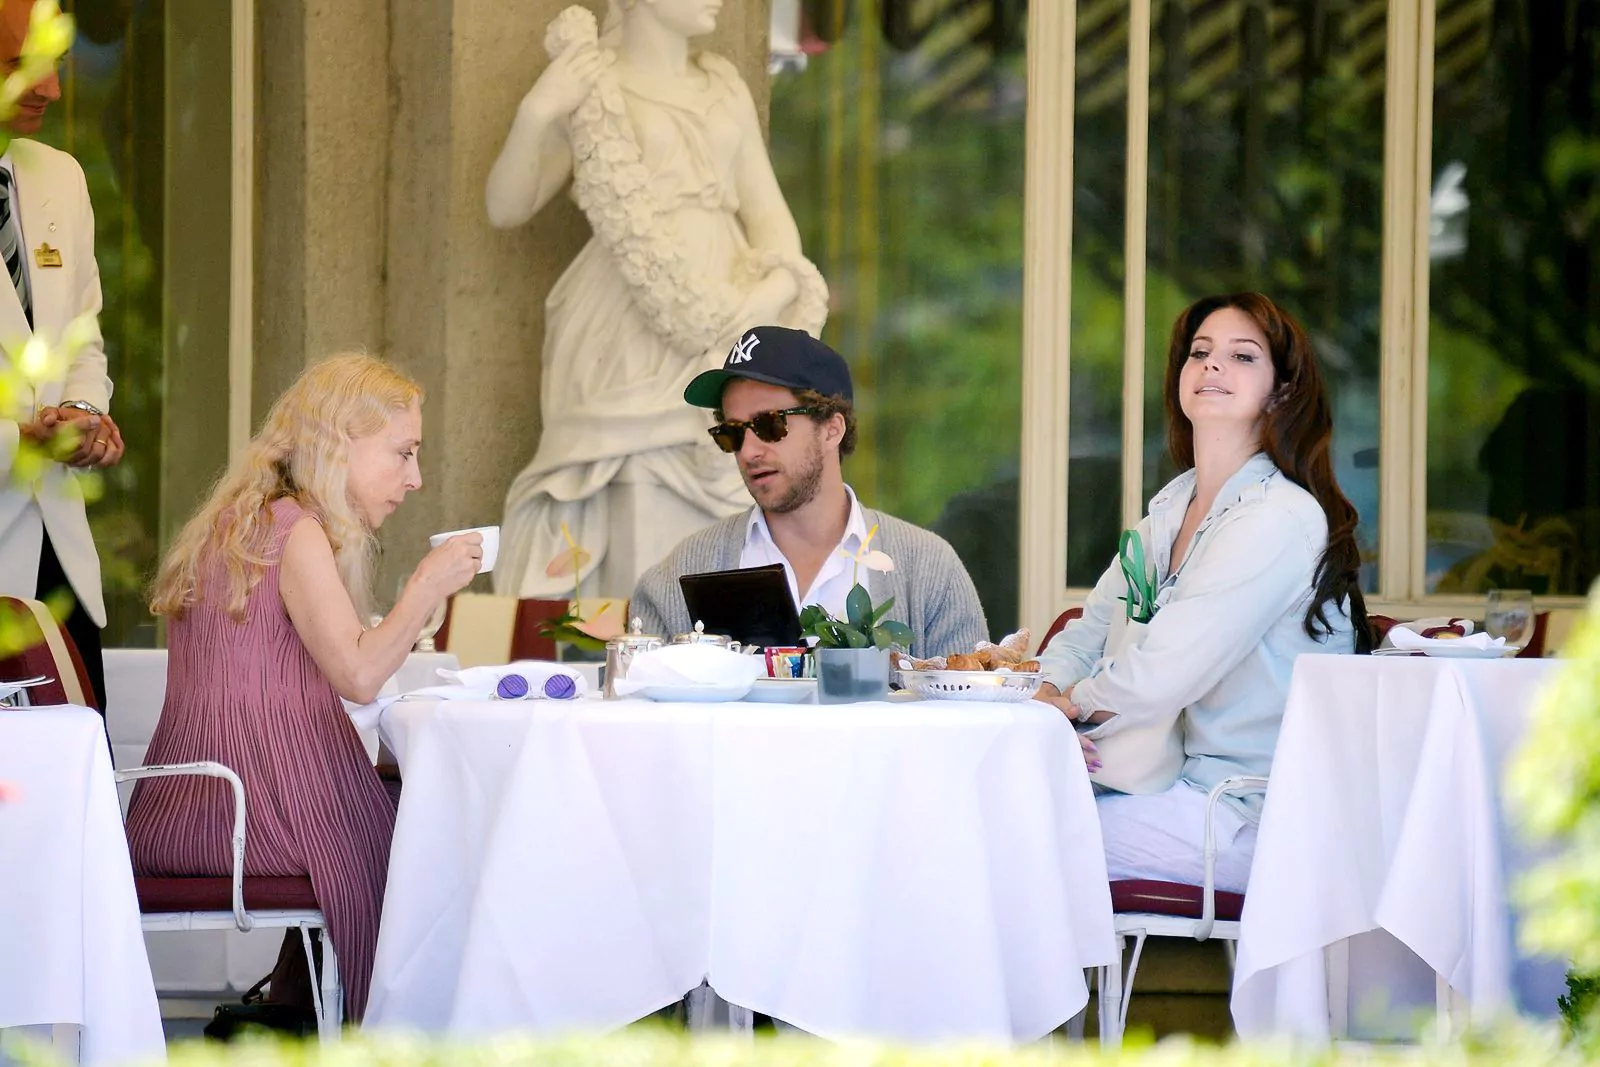 Franca Sozzani with son Francesco Carrozzini and his girlfriend Lana Del Rey while on vacation in Stresa, Italy, August 2, 2015.